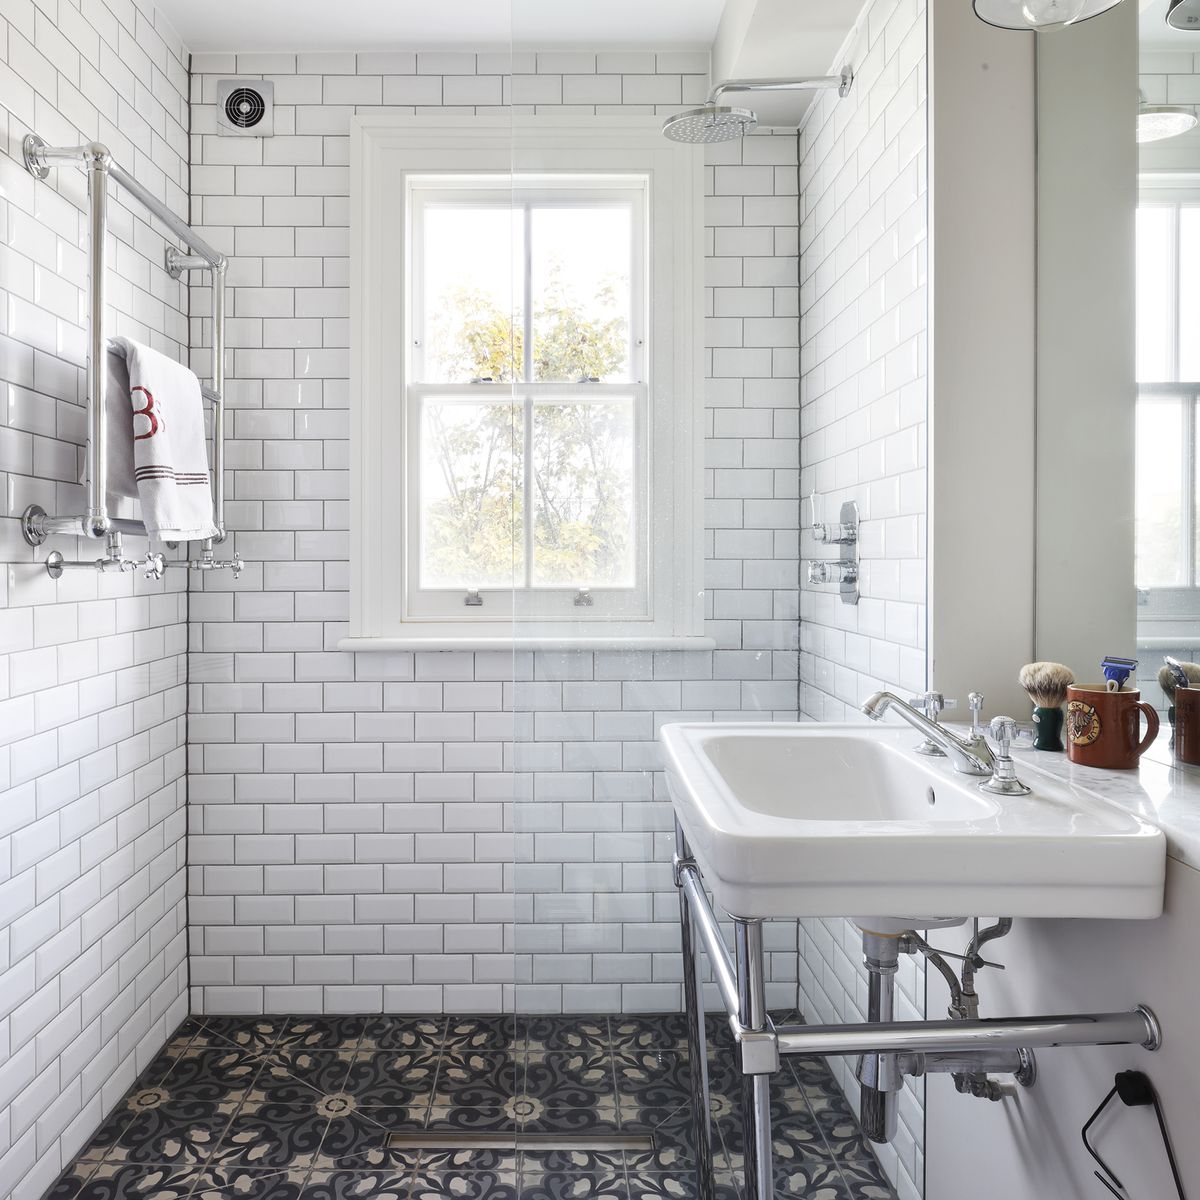 Metro tile bathroom ideas – get on board with these 10 inspiring looks